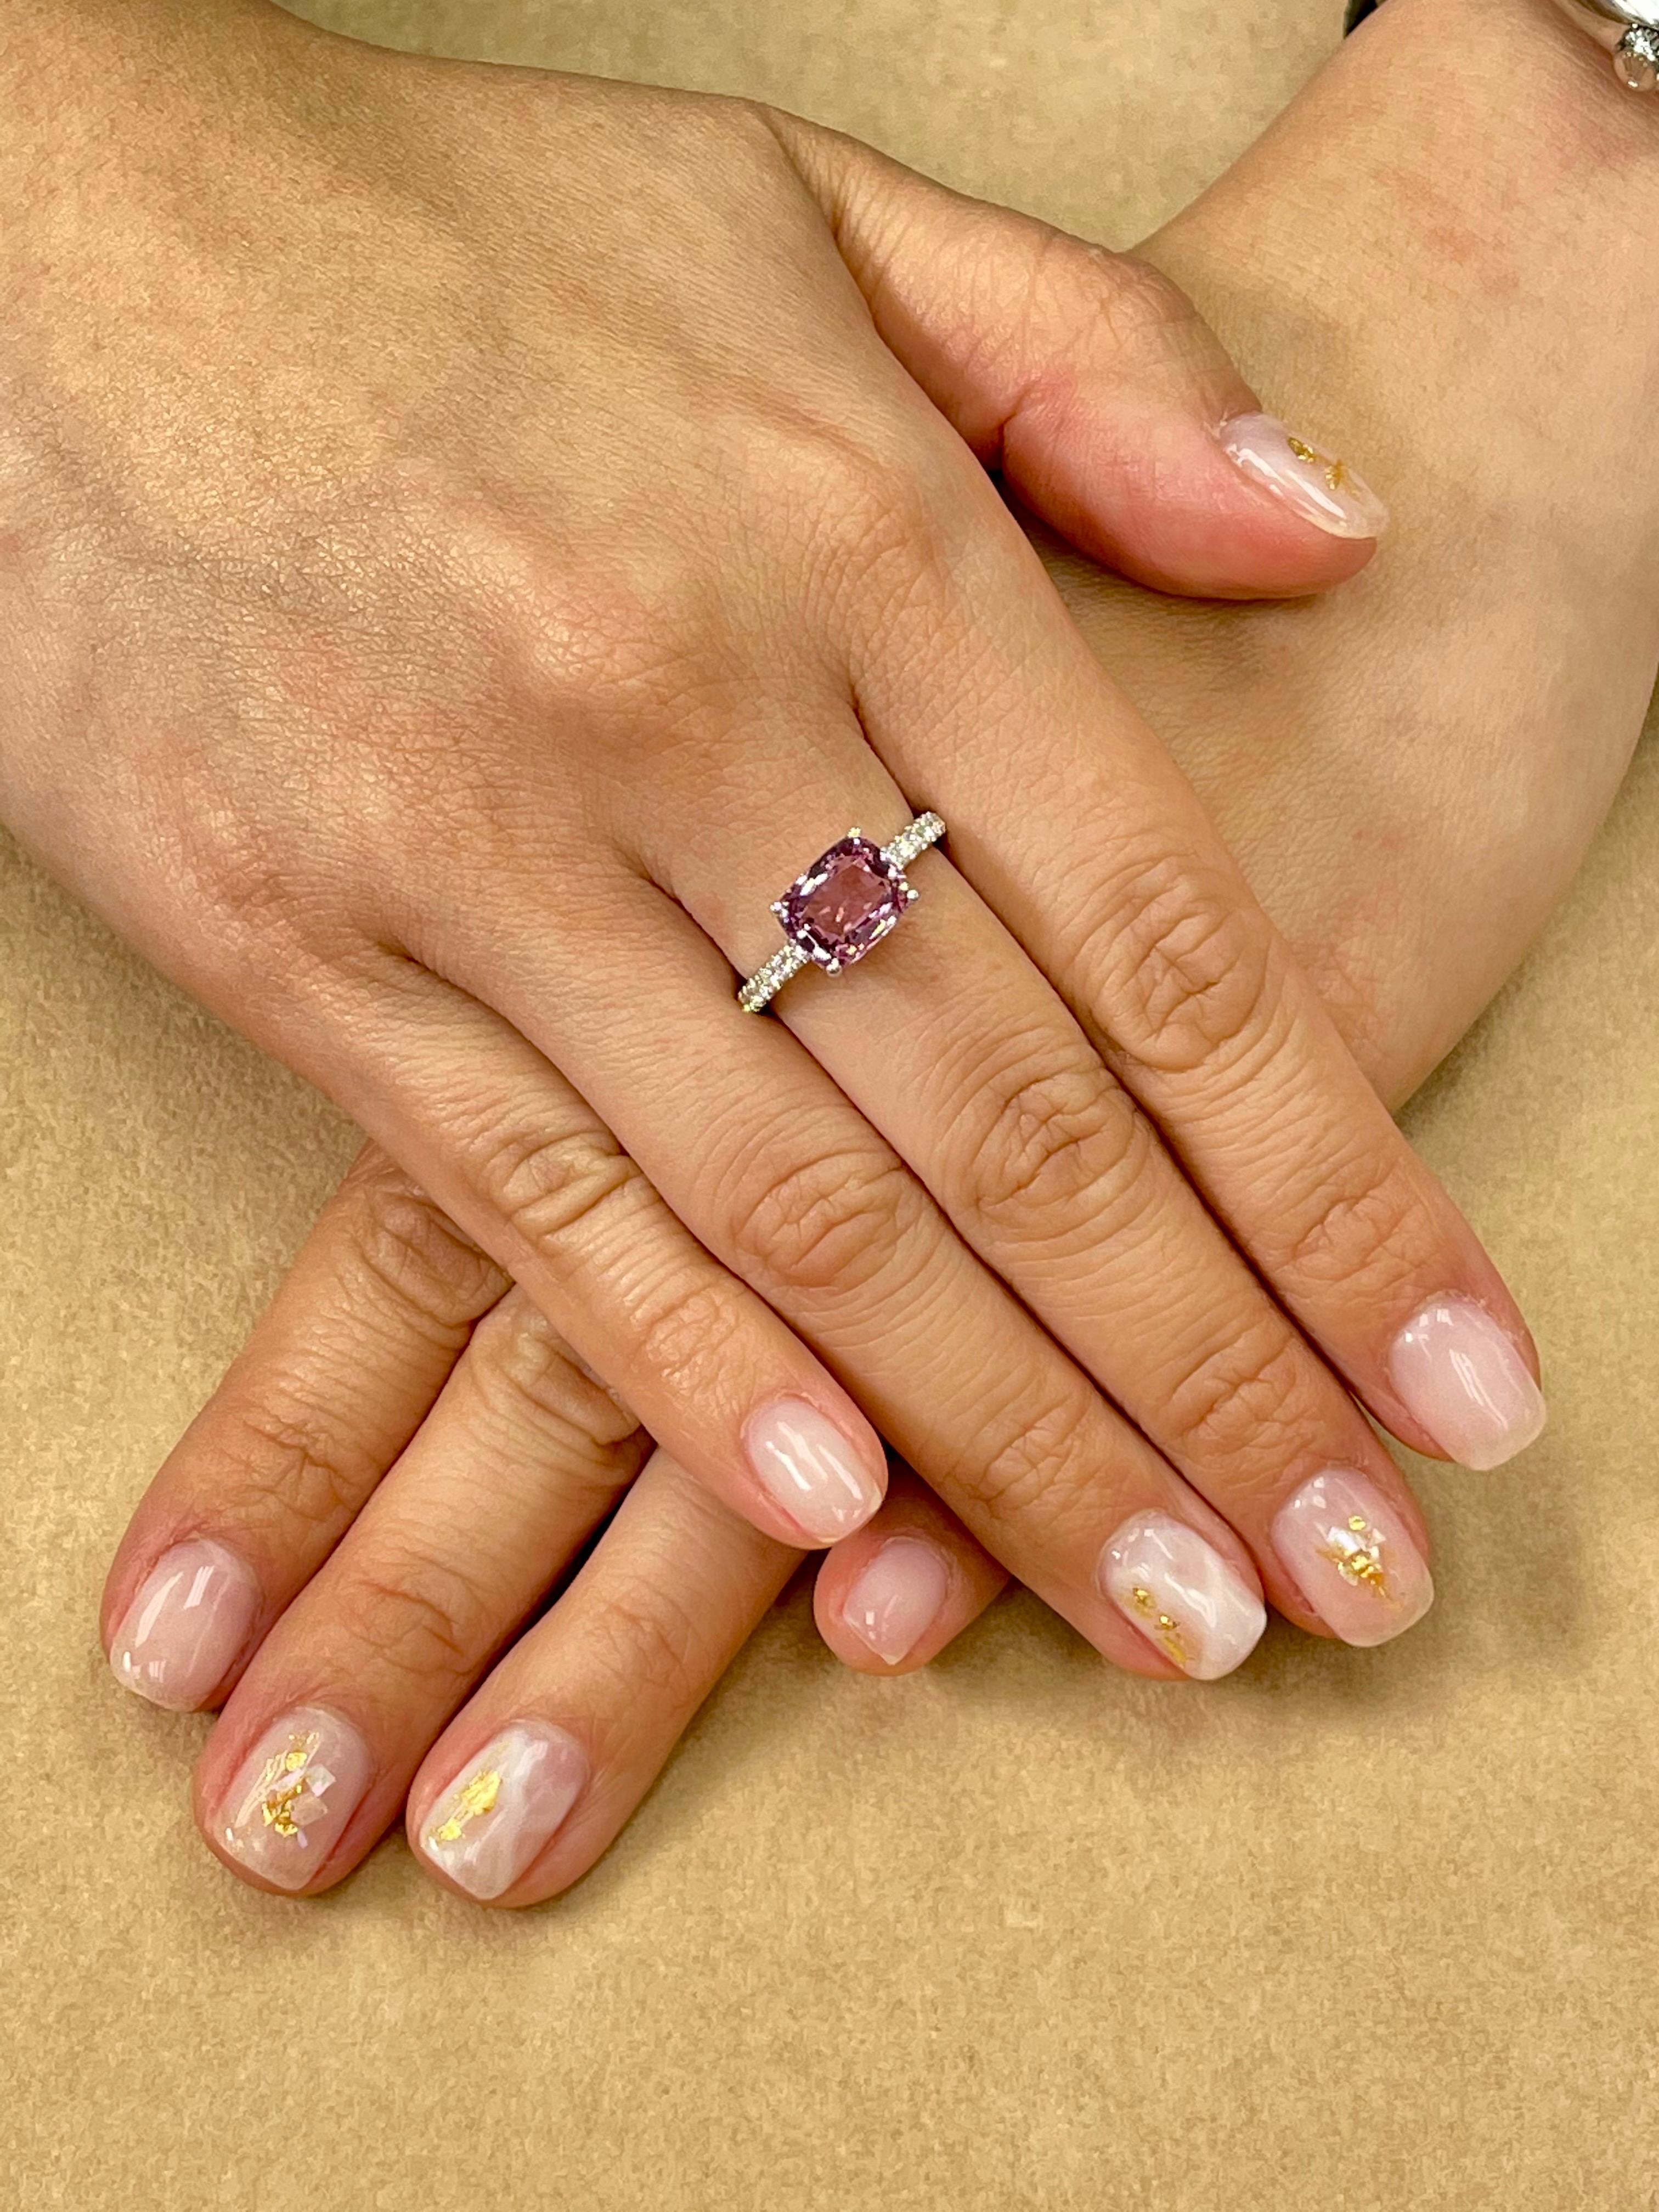 Please check out the HD video! Here is a wonderful pink Spinel and diamond cocktail ring. The ring is set in 18k white gold and diamonds. The natural spinel has a beautiful pink color, not too deep not too light. There are 0.20Cts of small round